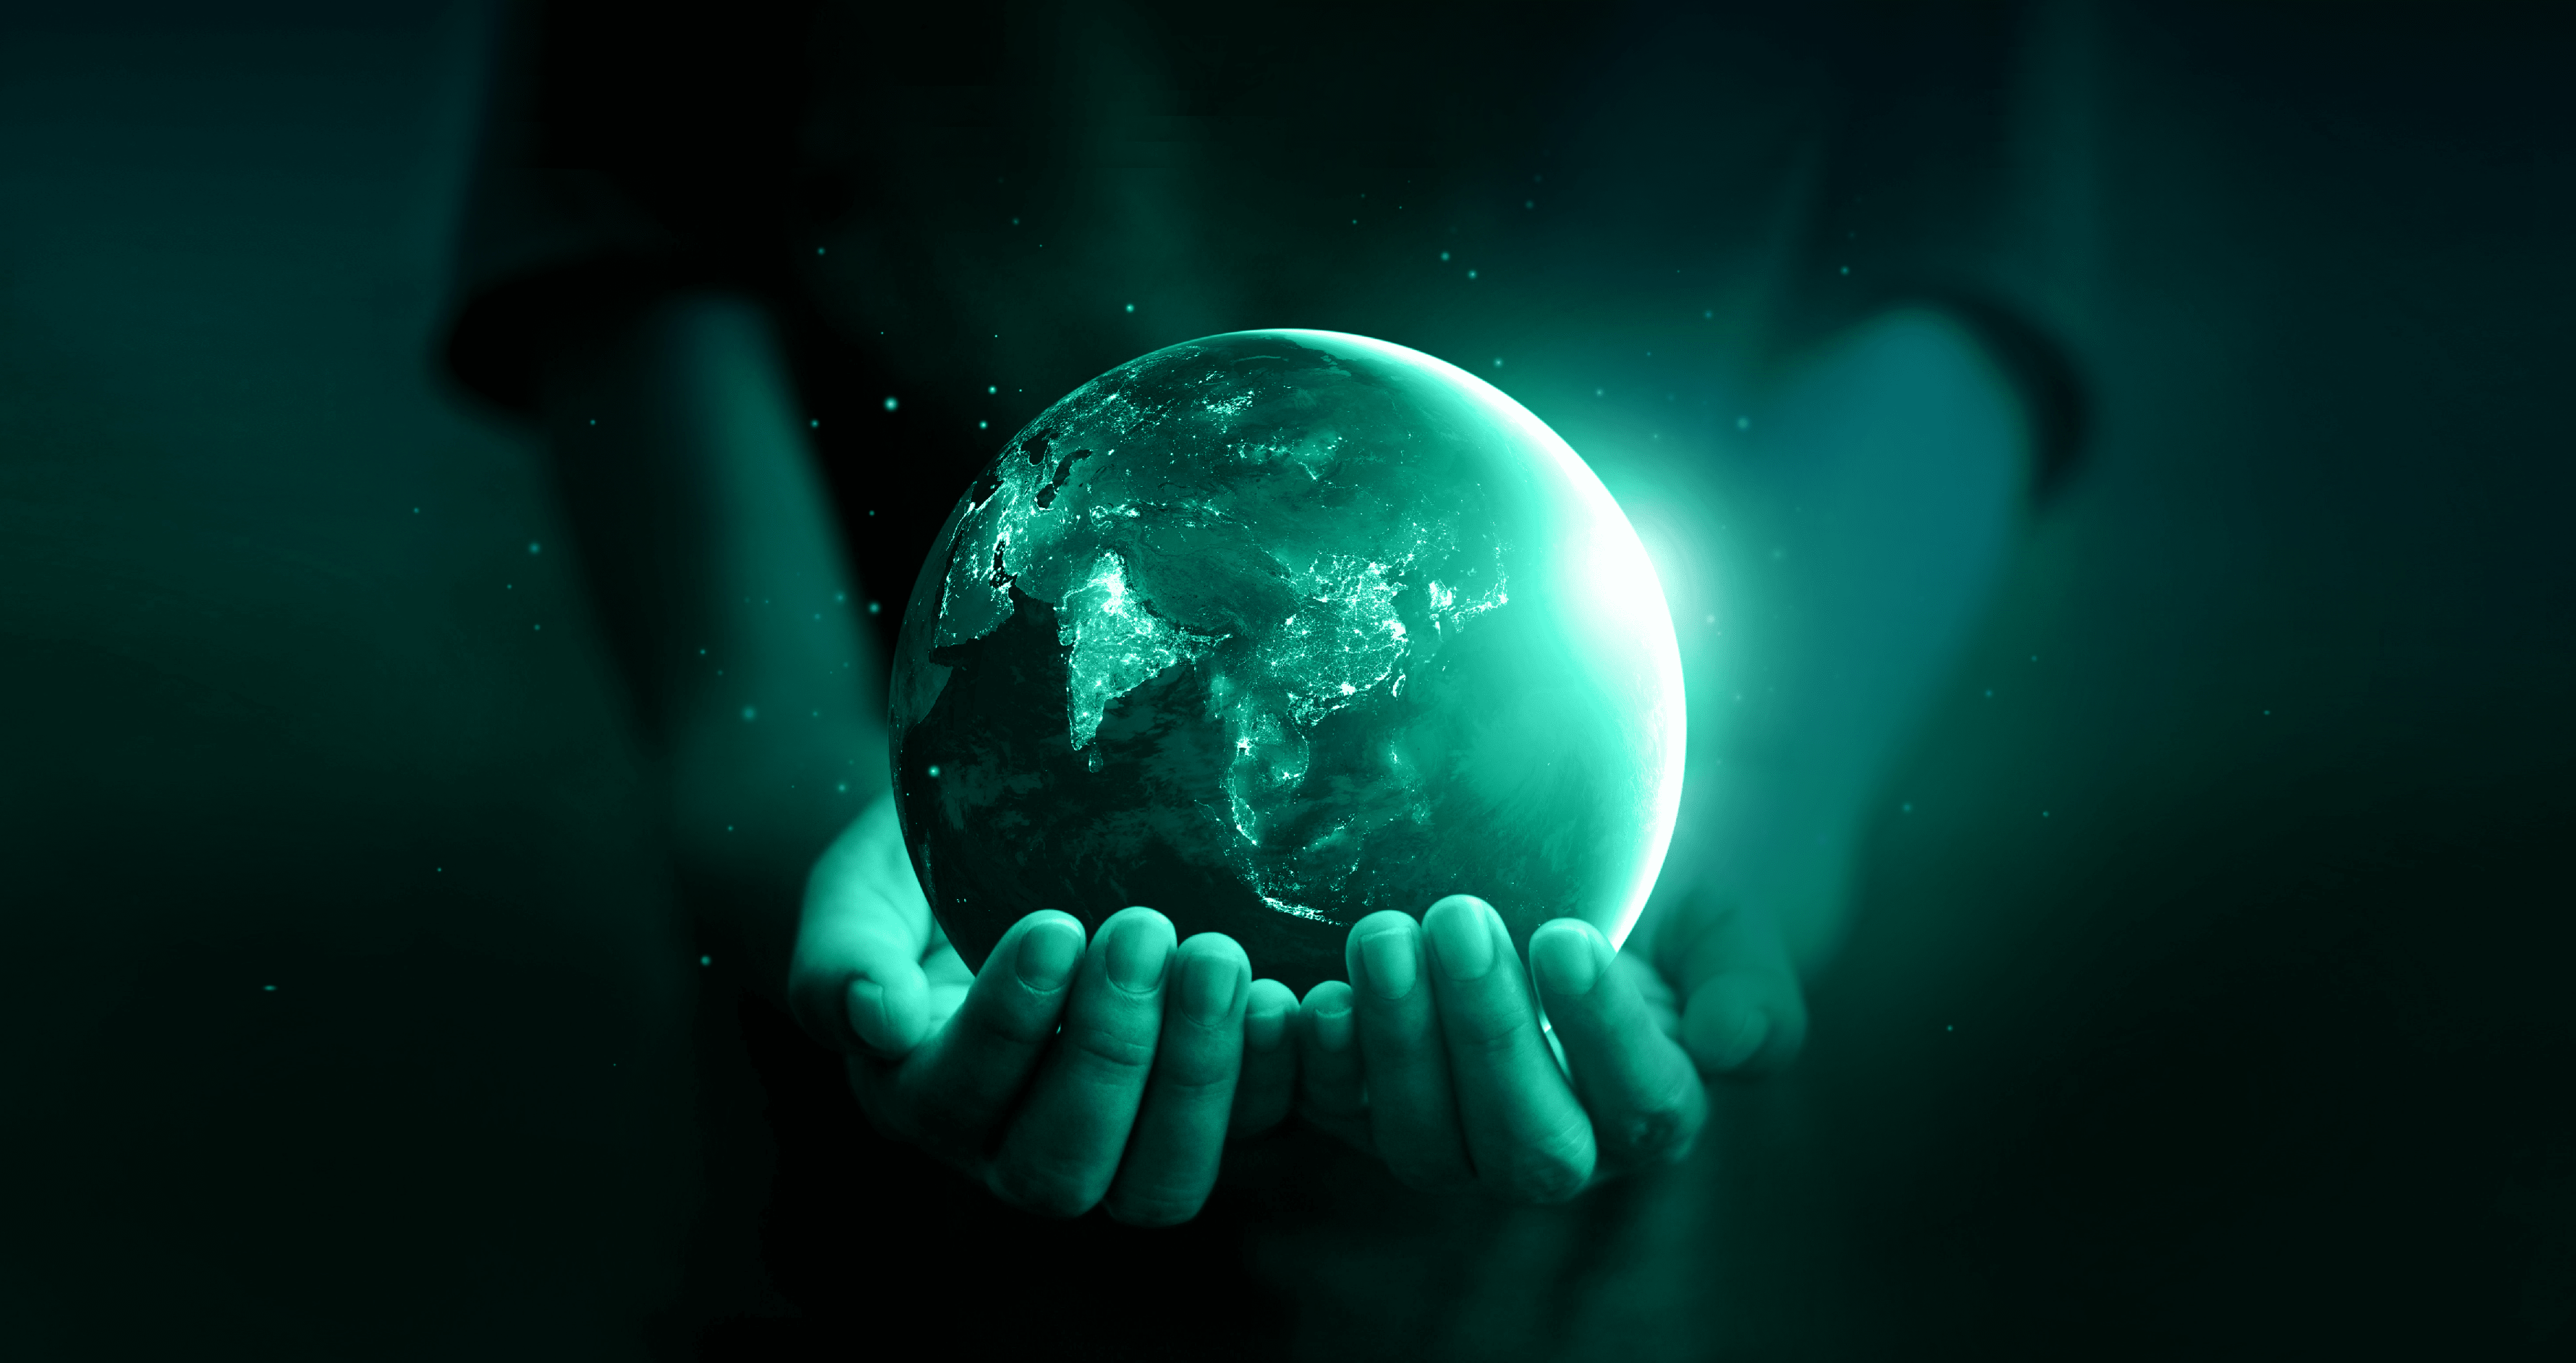 Earth at night was holding in human hands. Earth day. Energy saving concept, Elements of this image furnished by NASA  https://eoimages.gsfc.nasa.gov/images/imagerecords/79000/79790/city_lights_asia_night_8k.jpg